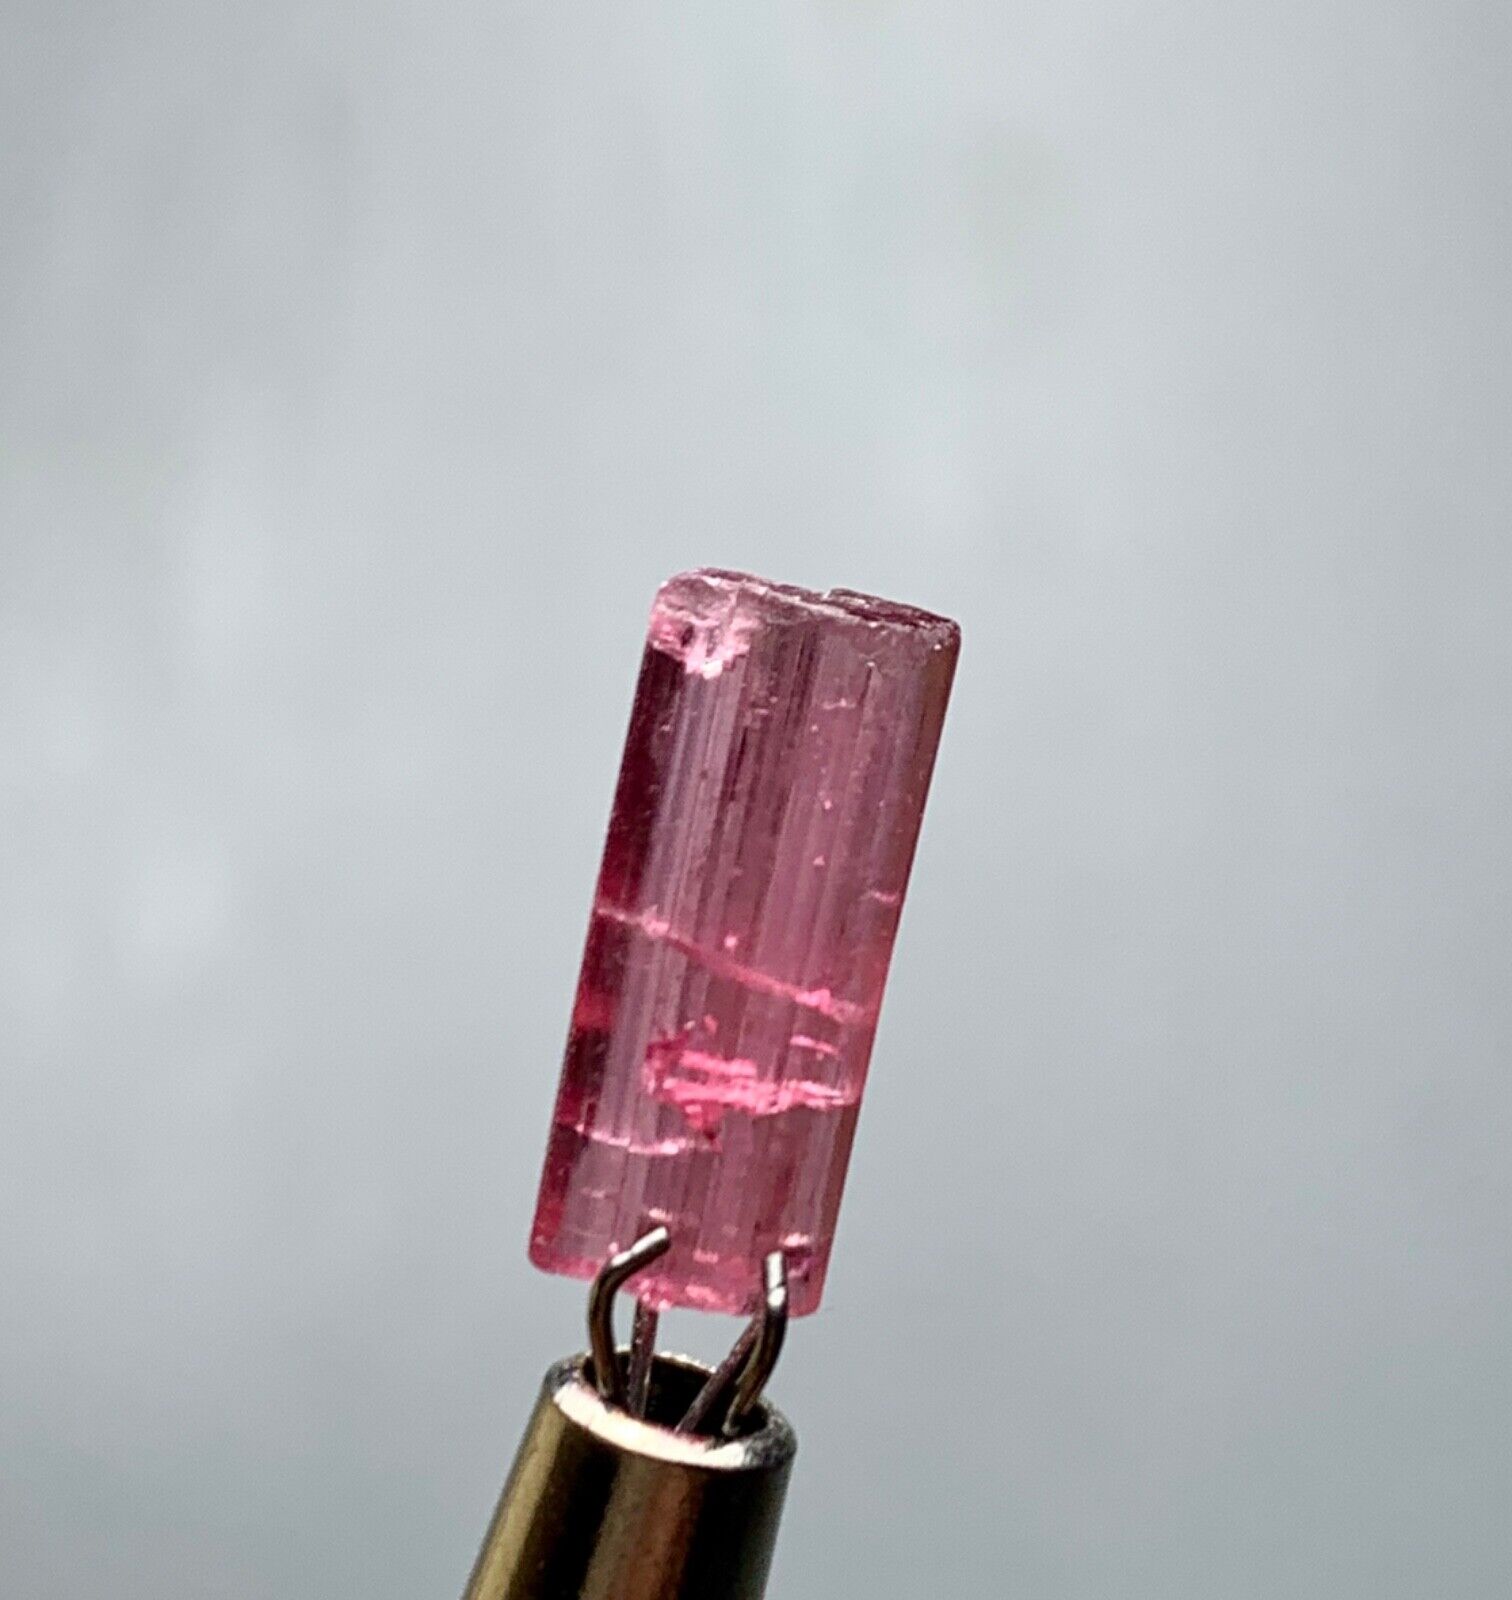 2.10 Cts Beautiful Pink Tourmaline Crystal from Afghanistan